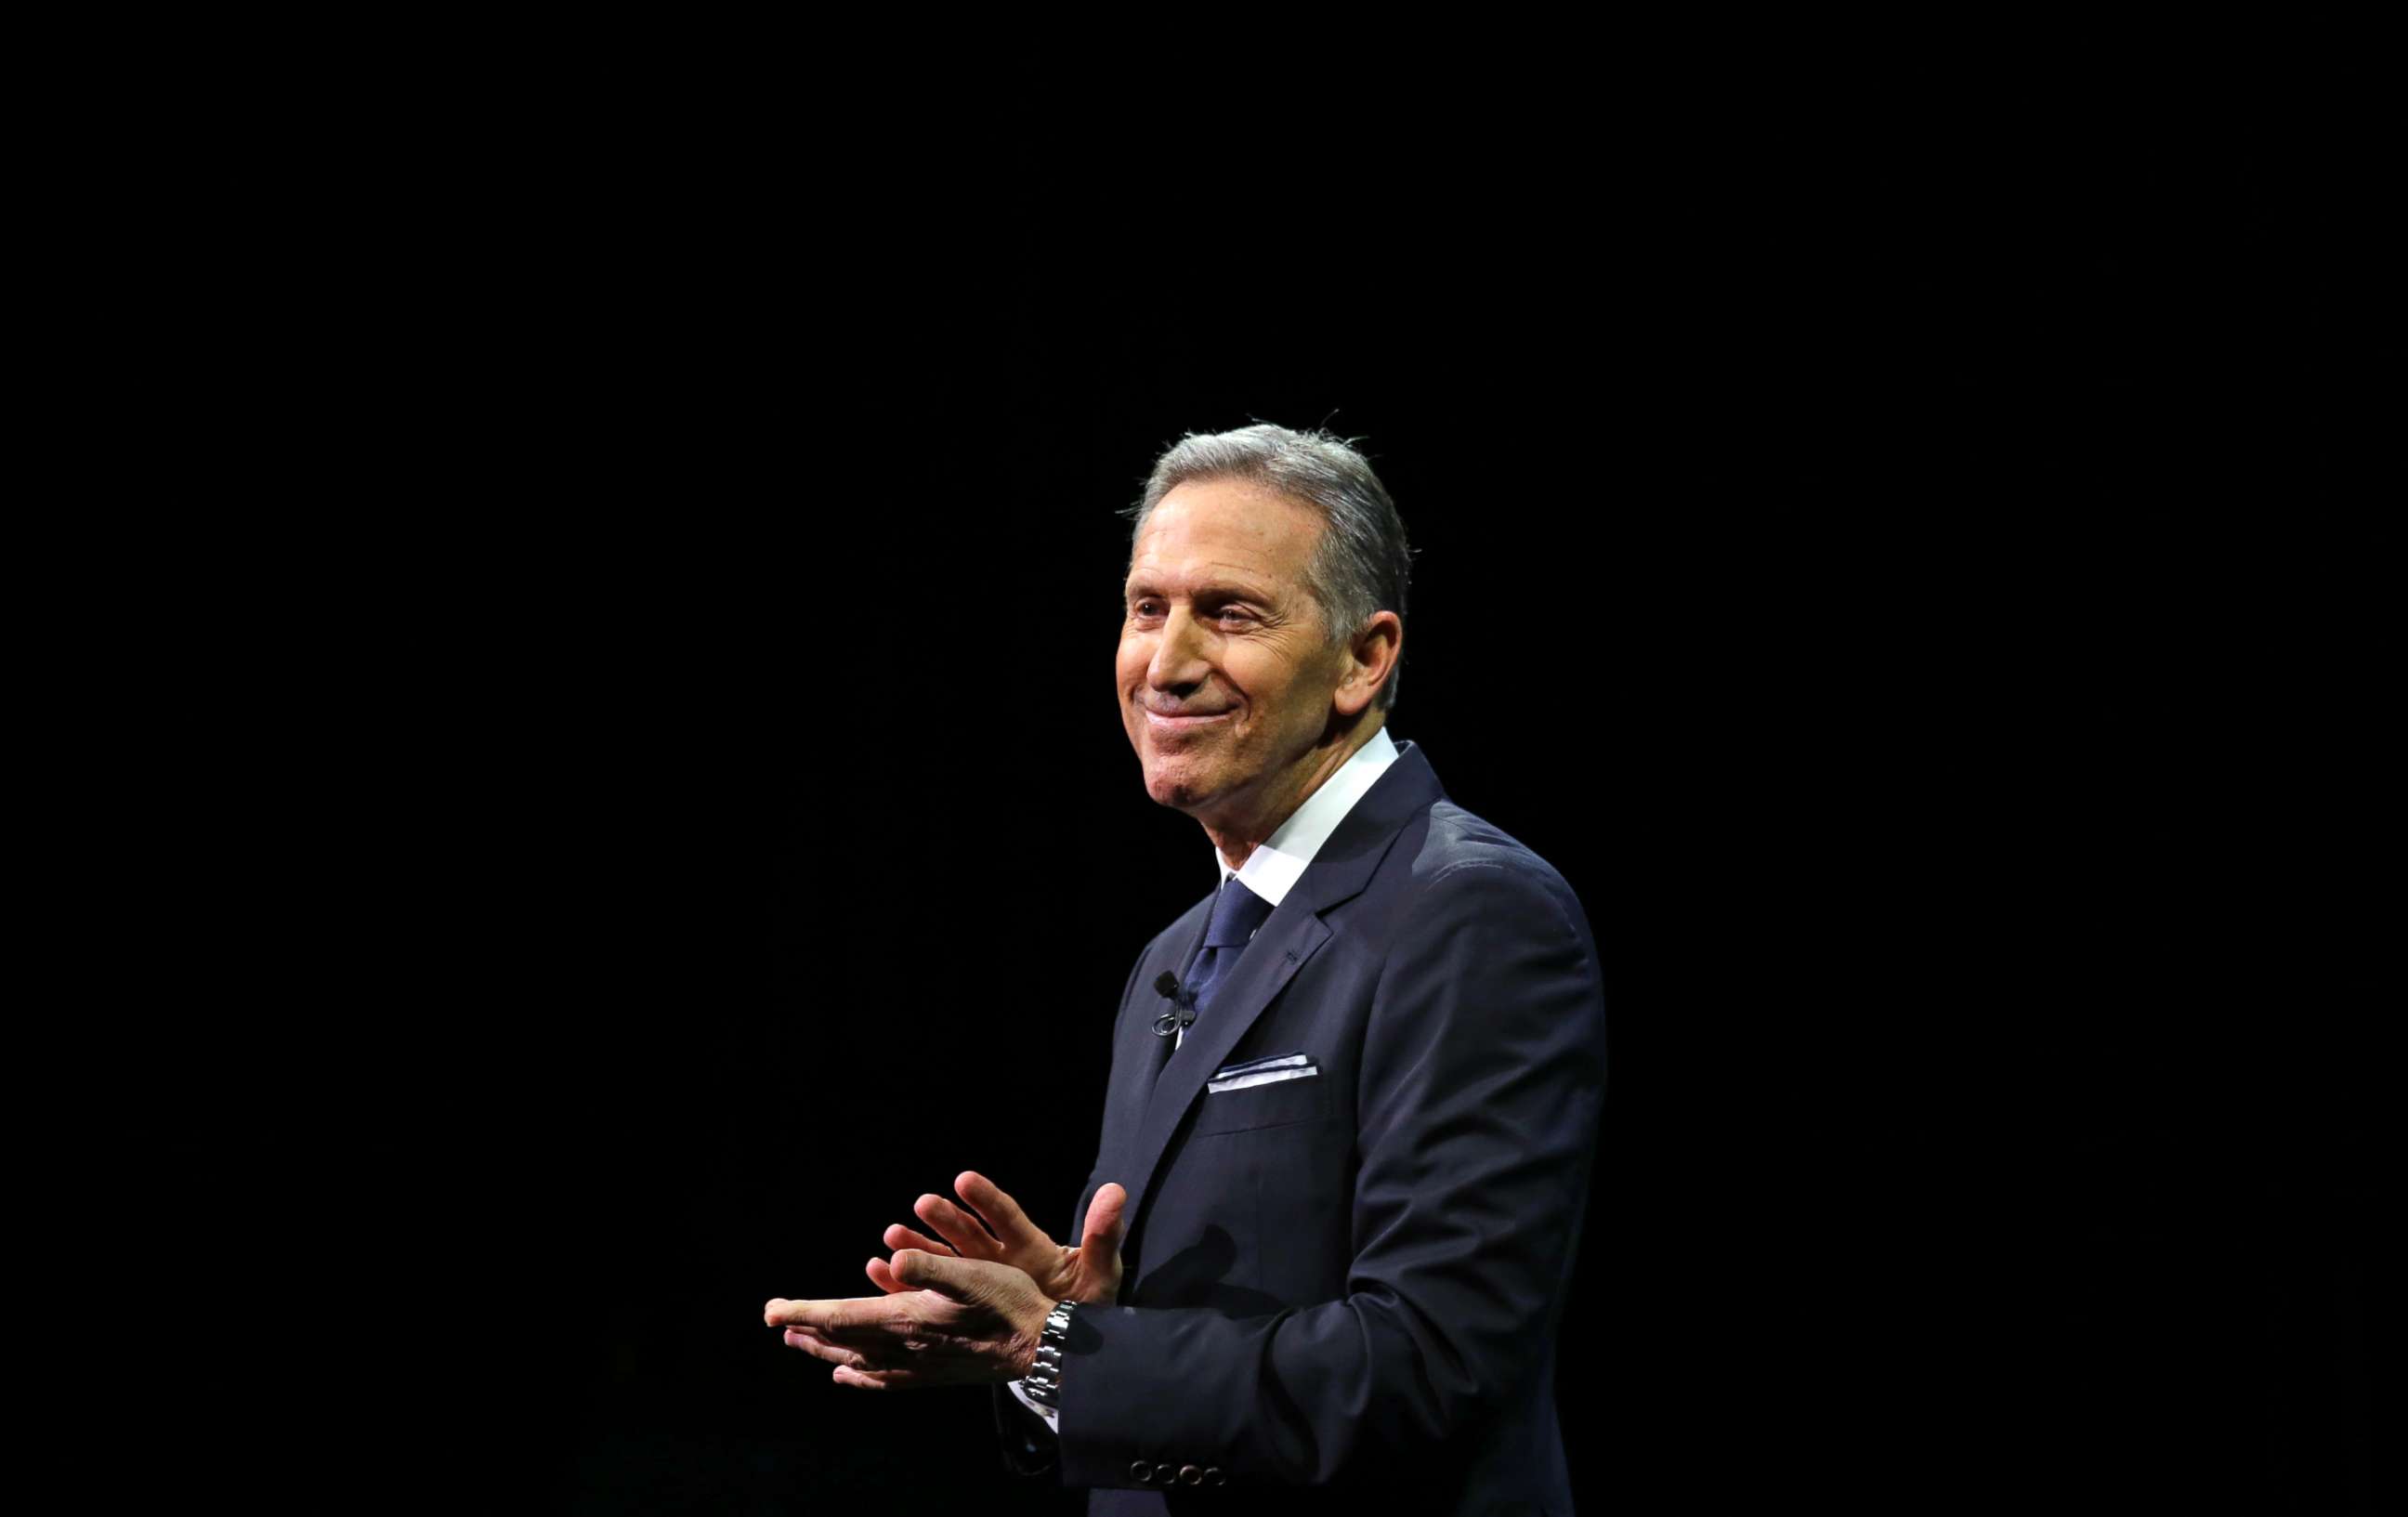 PHOTO: Then-Starbucks CEO Howard Schultz pauses as he speaks to applaud employees at the Starbucks annual shareholders meeting, March 22, 2017, in Seattle.